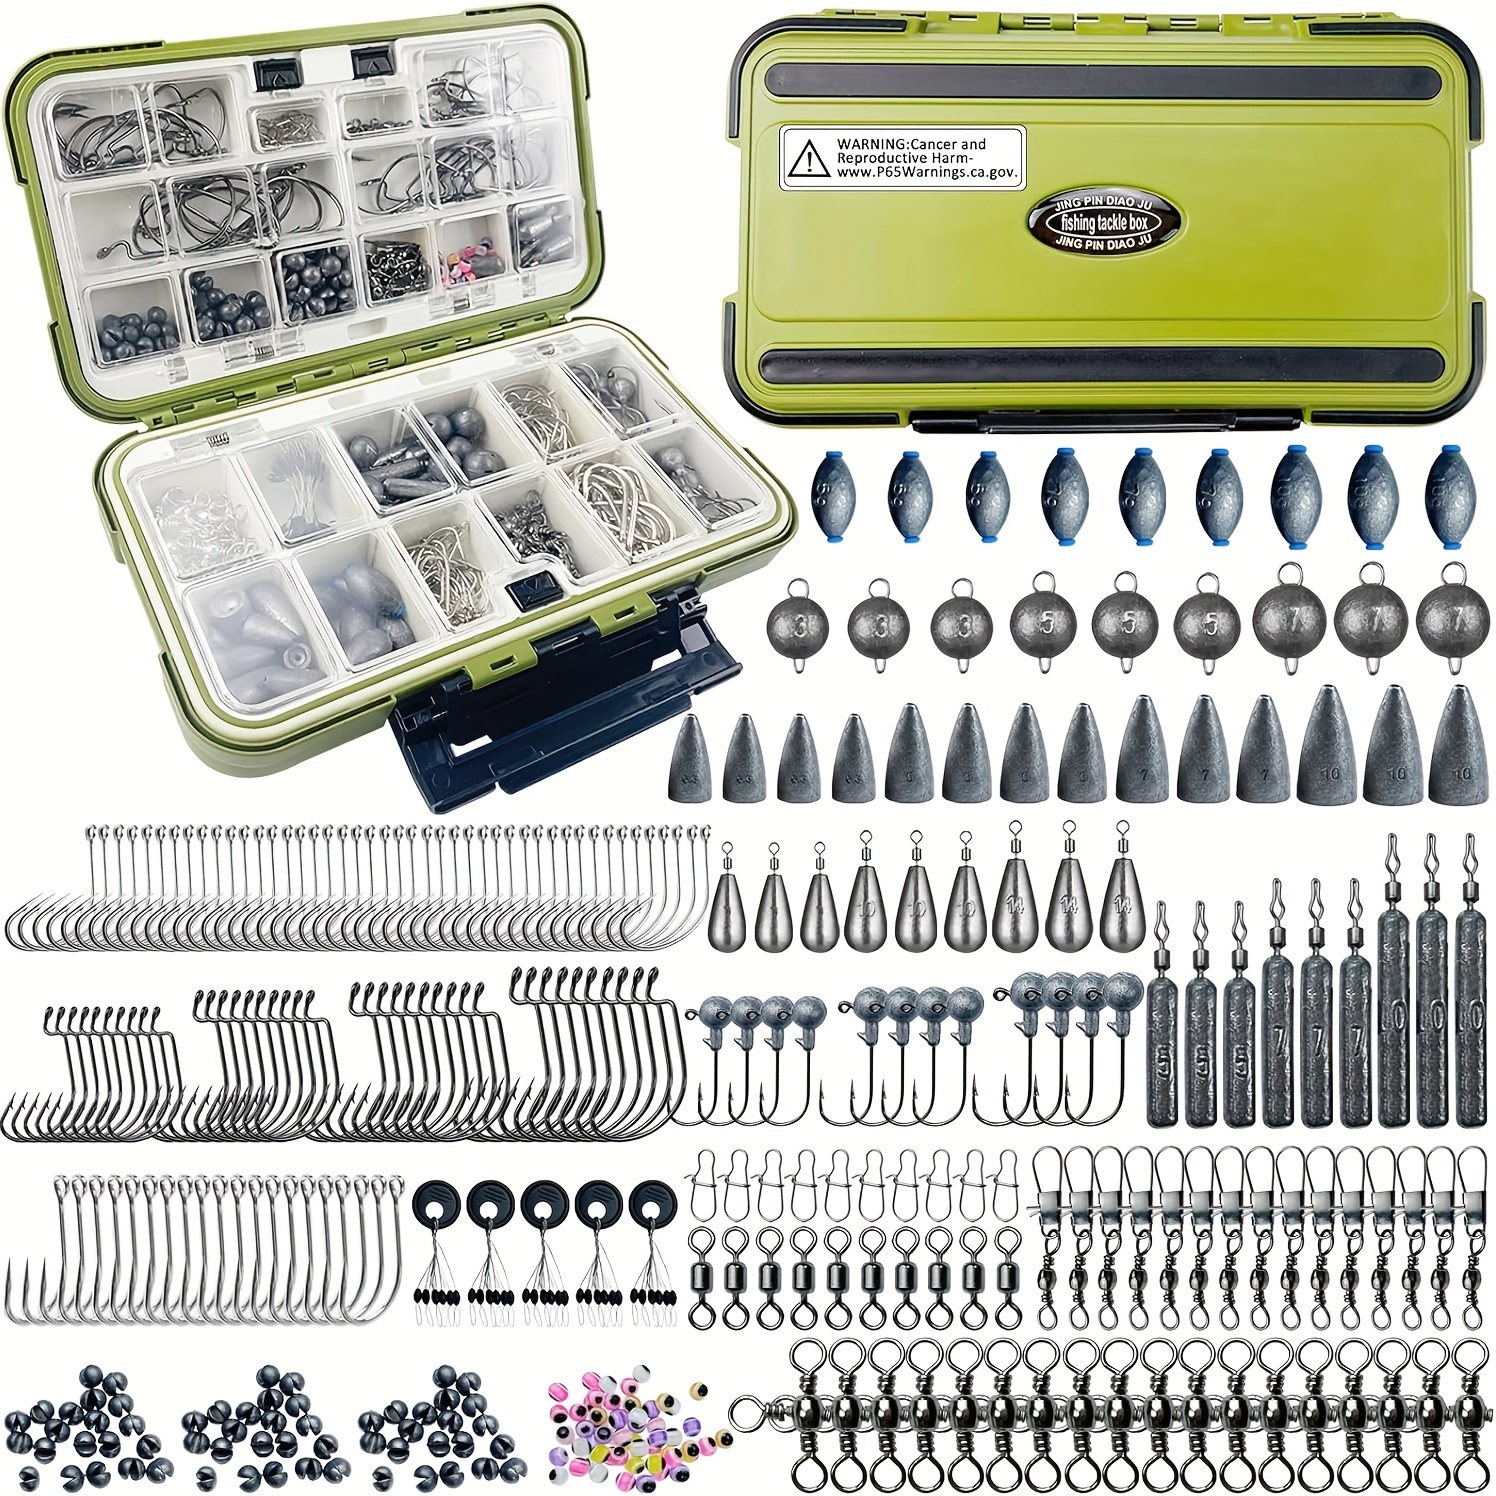 

306pcs Fishing Lure Accessories Kit Including Fishing Hooks, Fishing Sinkers Weights, Fishing Rubber Bobber Jigs Fishing Beads Fishing Swivels Snaps, Fishing Gear Kit With Tackle Box